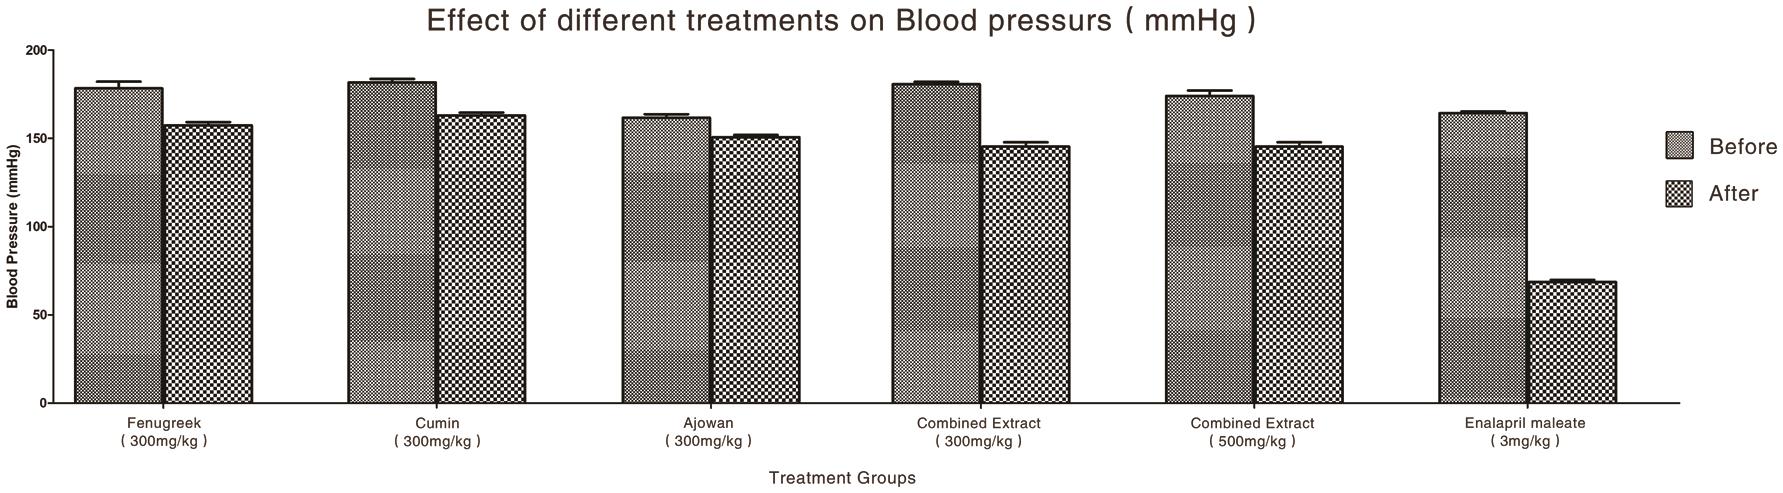 Effect of different treatments on blood pressures (mmHg).